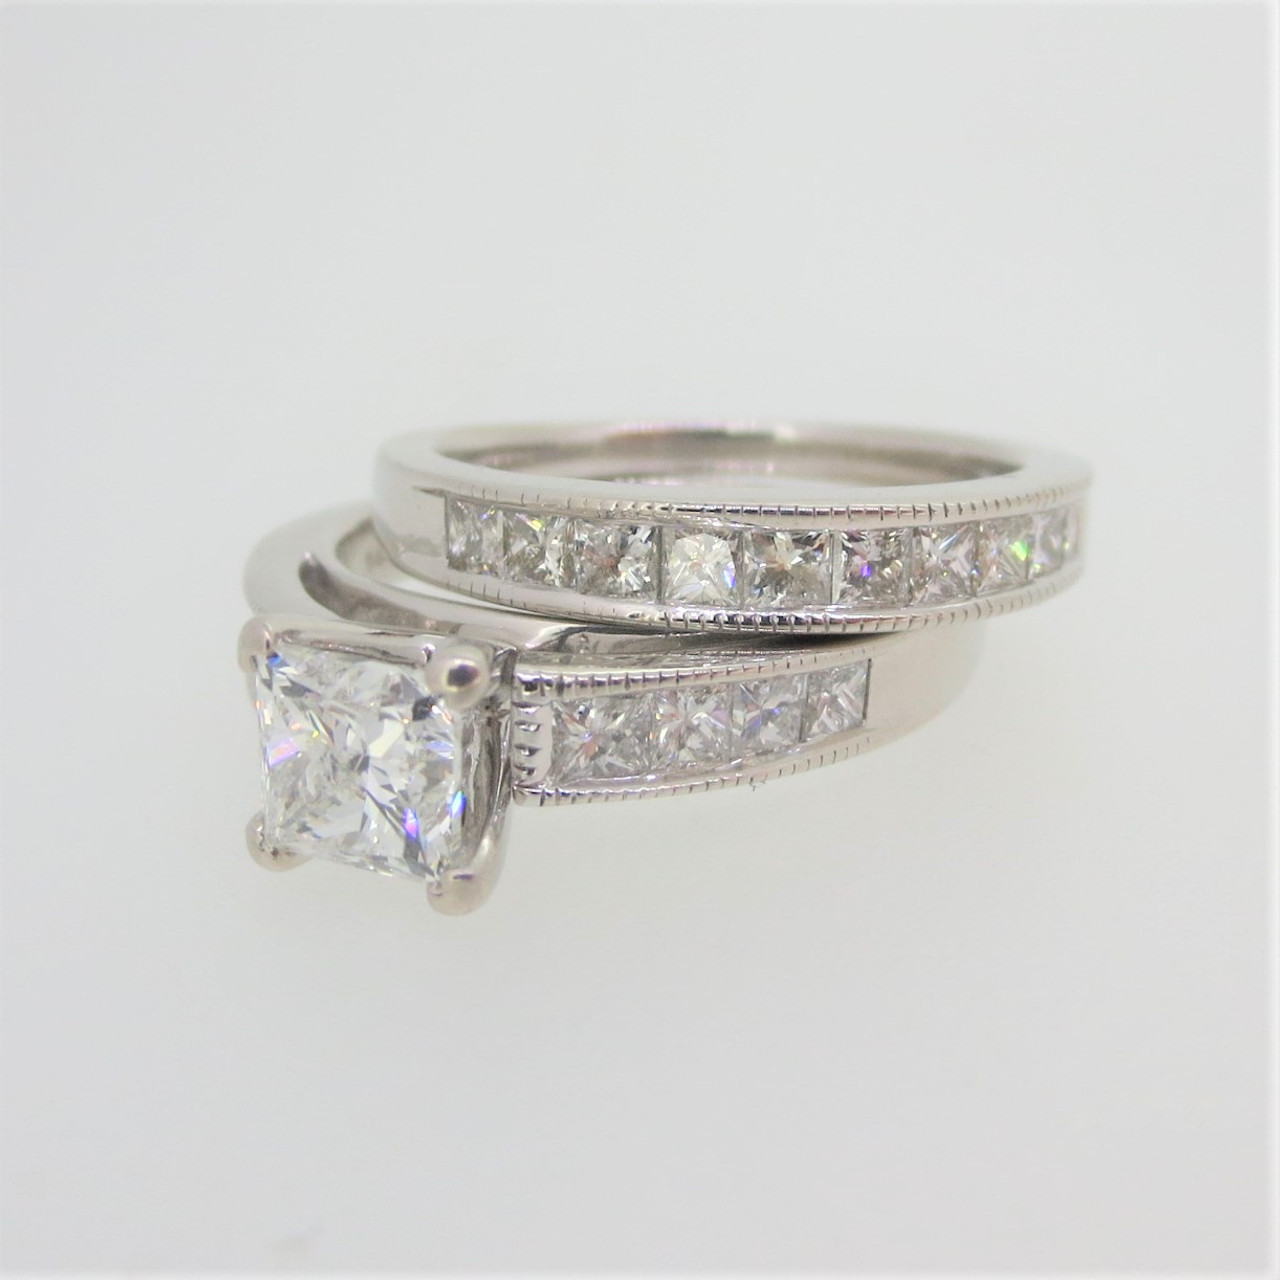  SHELOVES 3 Carat Emerald Cut Engagement Rings for